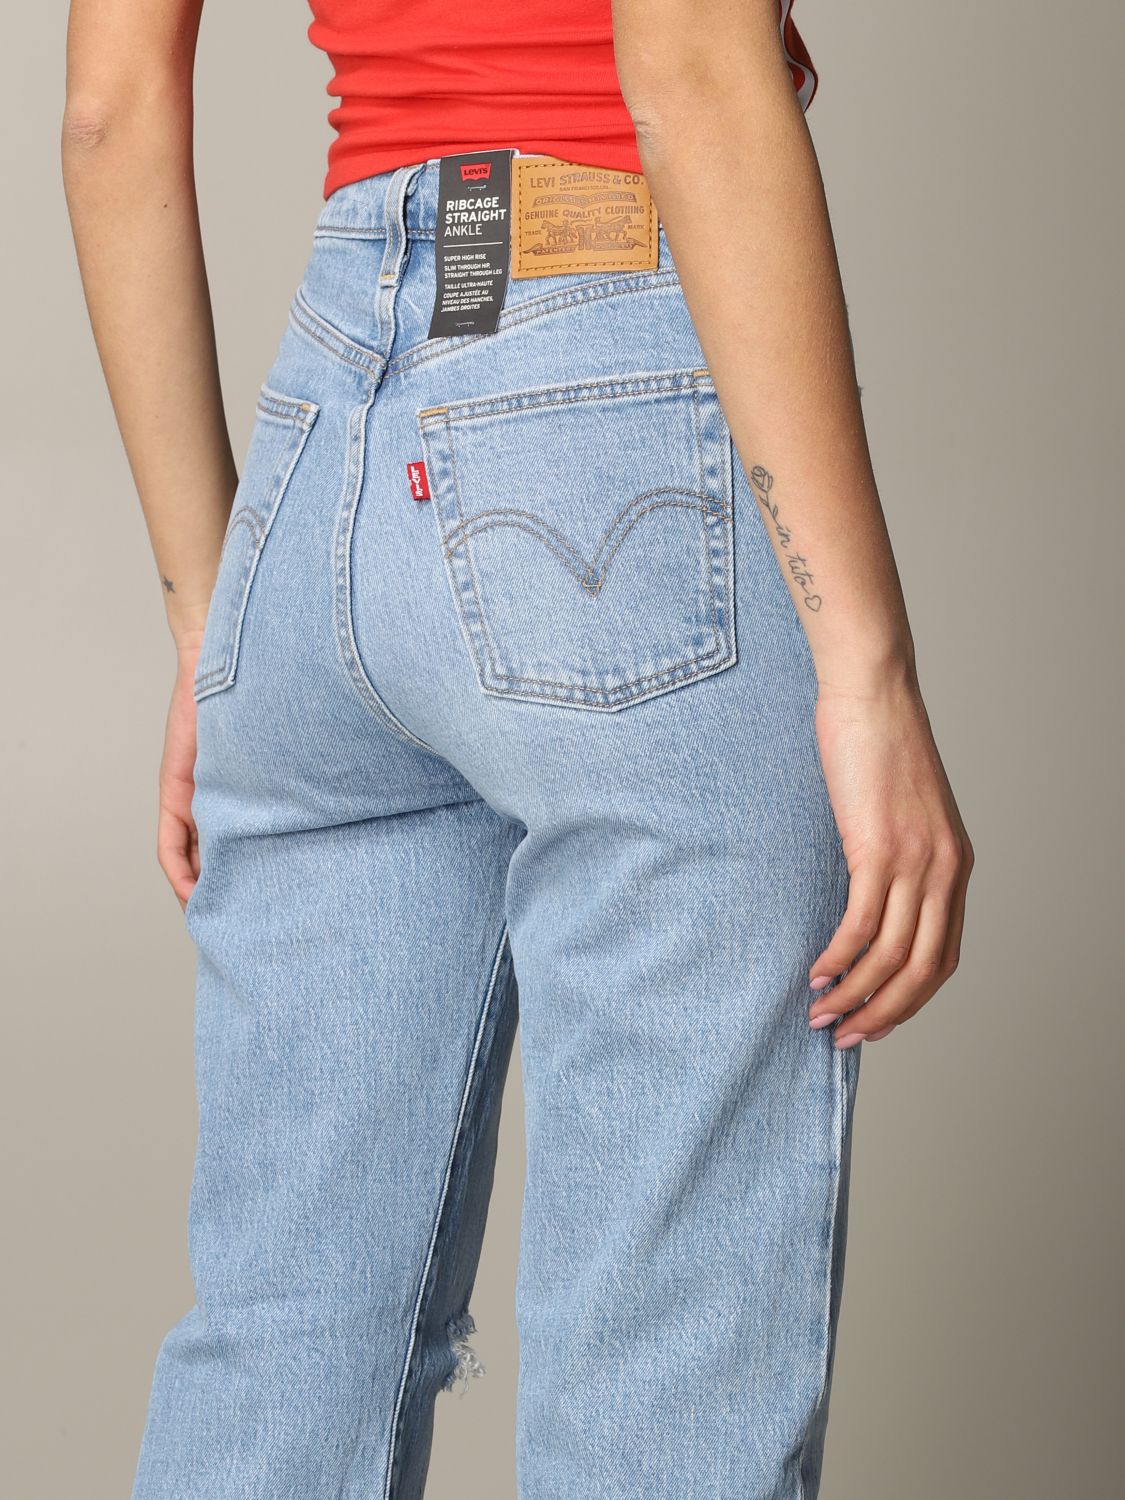 levis high wasted jeans